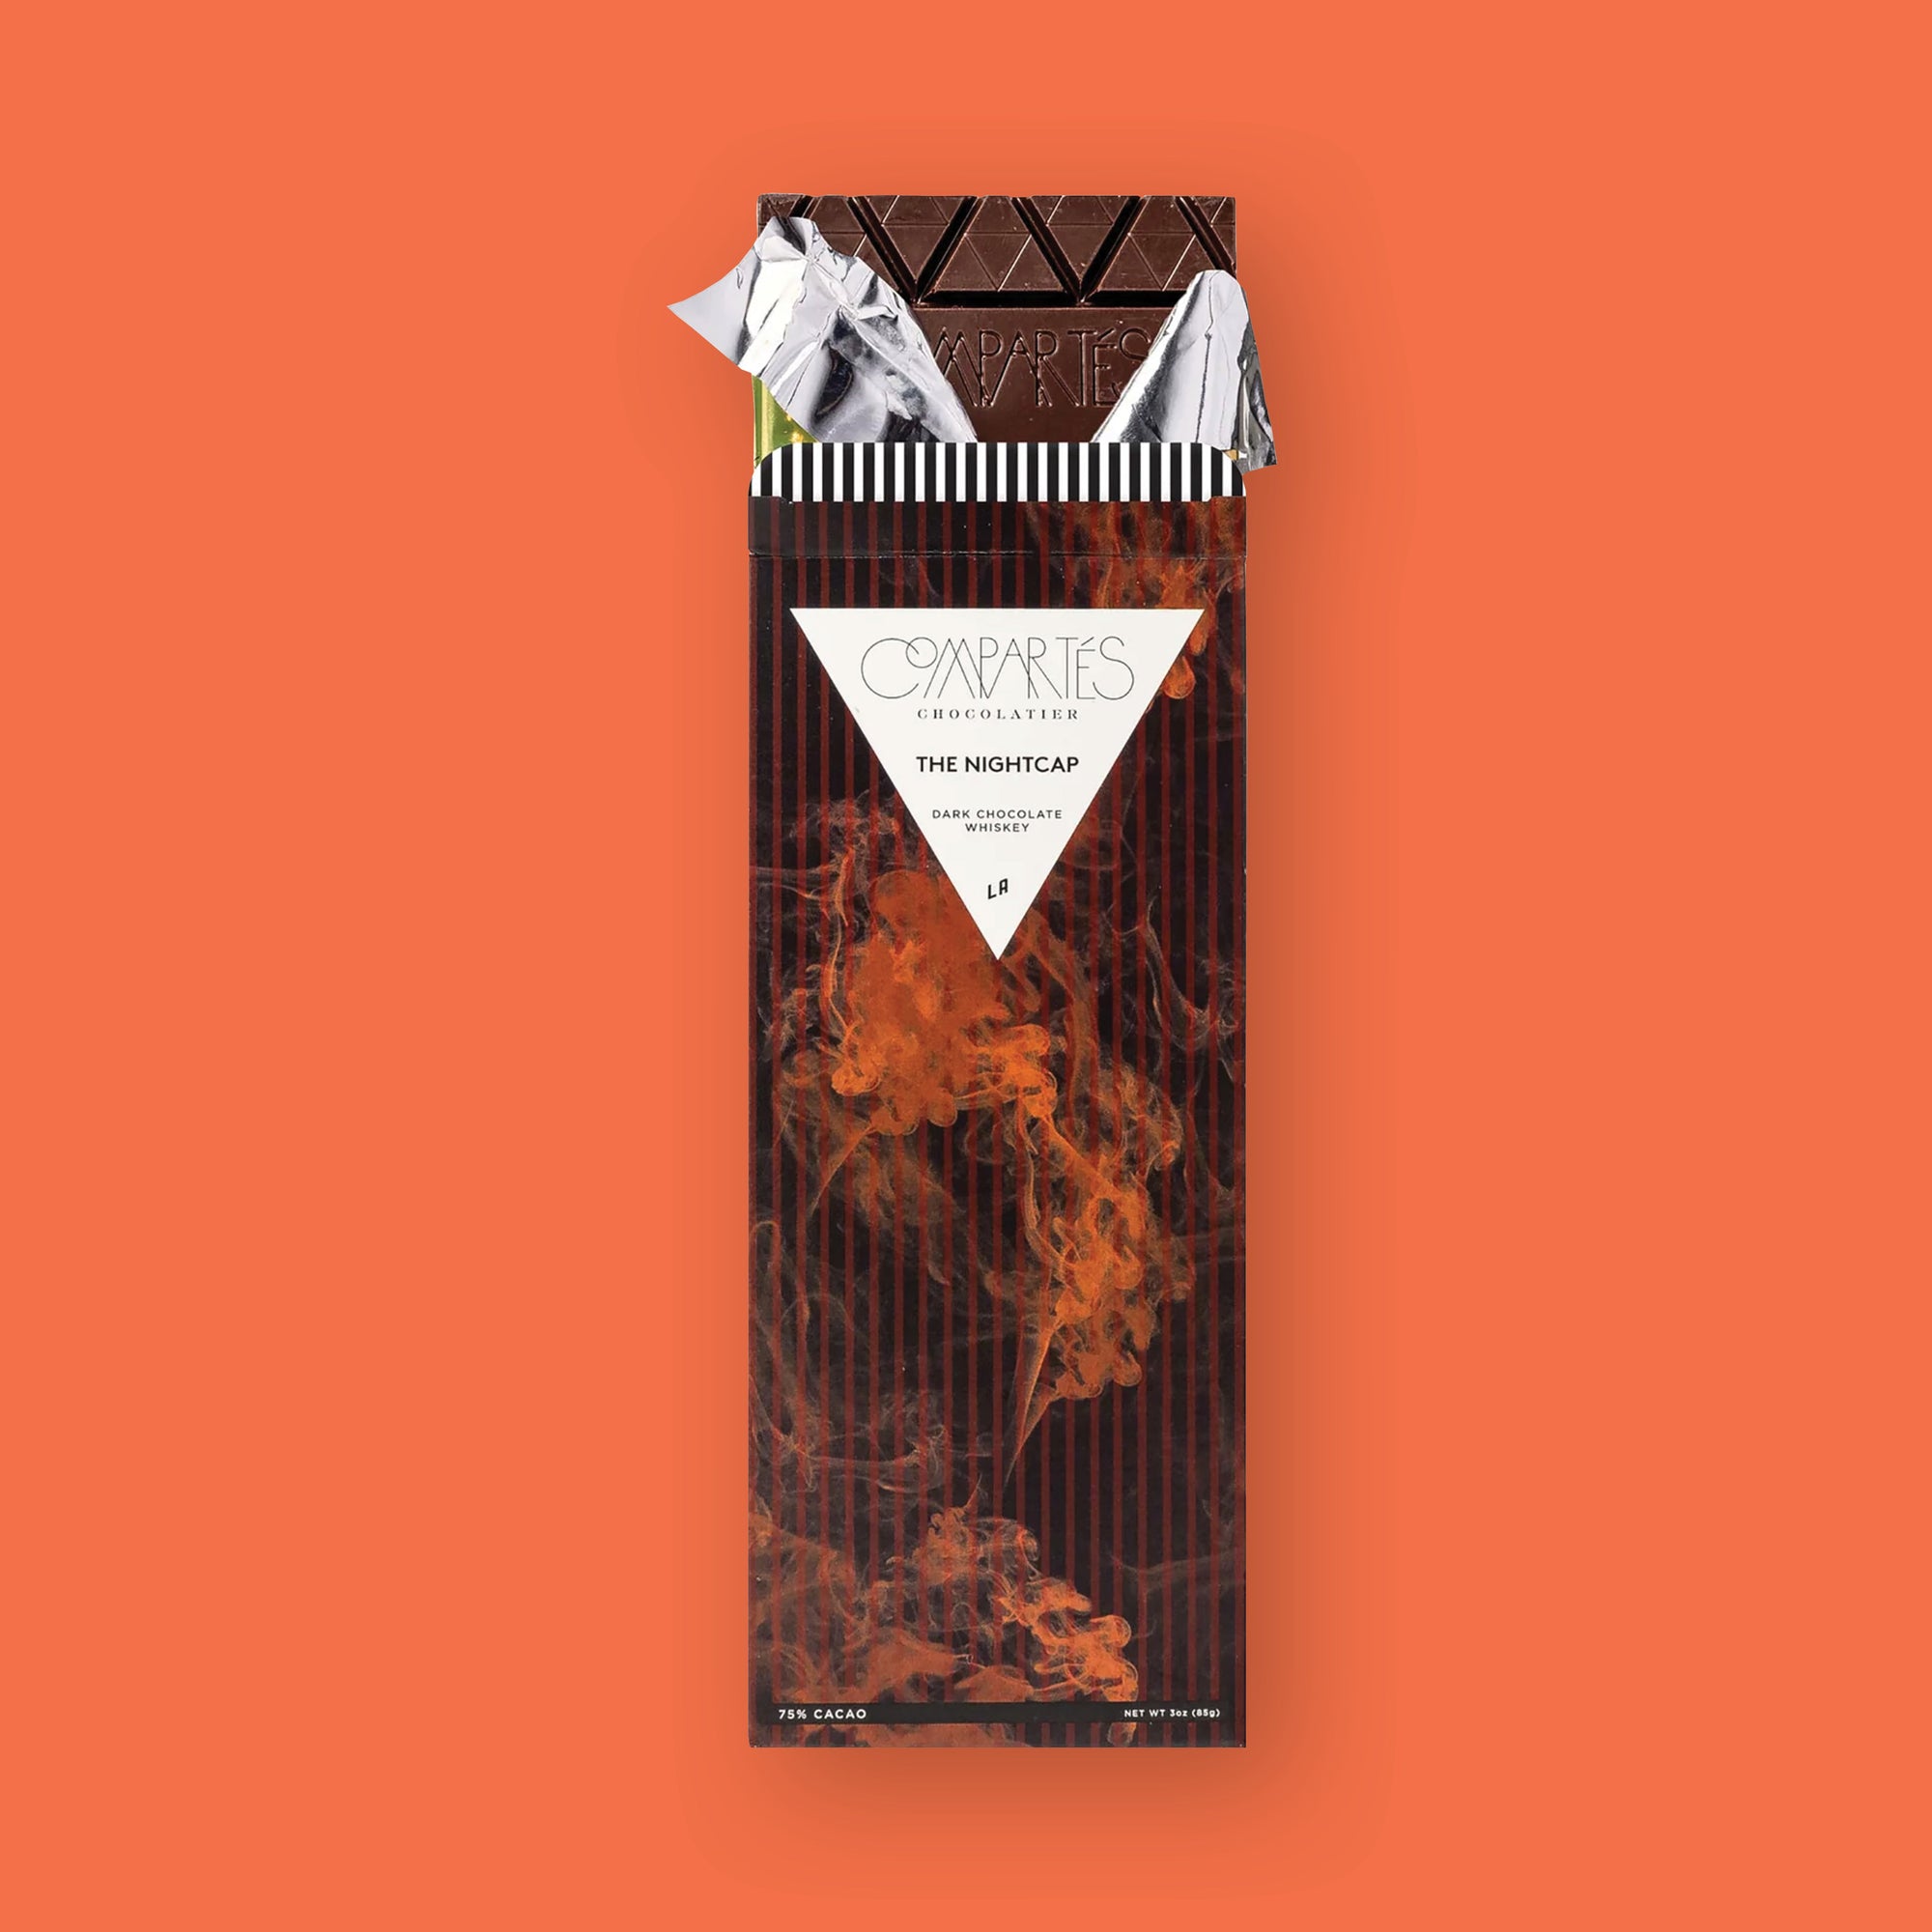 On an orangey-red background sits an opened package. This brown striped, smokey package has a chocolate bar sticking out of the top with gold and silver foil that is opened. On the front of the package is a white triangle and it says "COMPARTES CHOCOLATIER," "THE NIGHTCAP," "DARK CHOCOLATE WHISKEY," and "LA" all in black font. 75% CACAO NET WT 3OZ (85G)